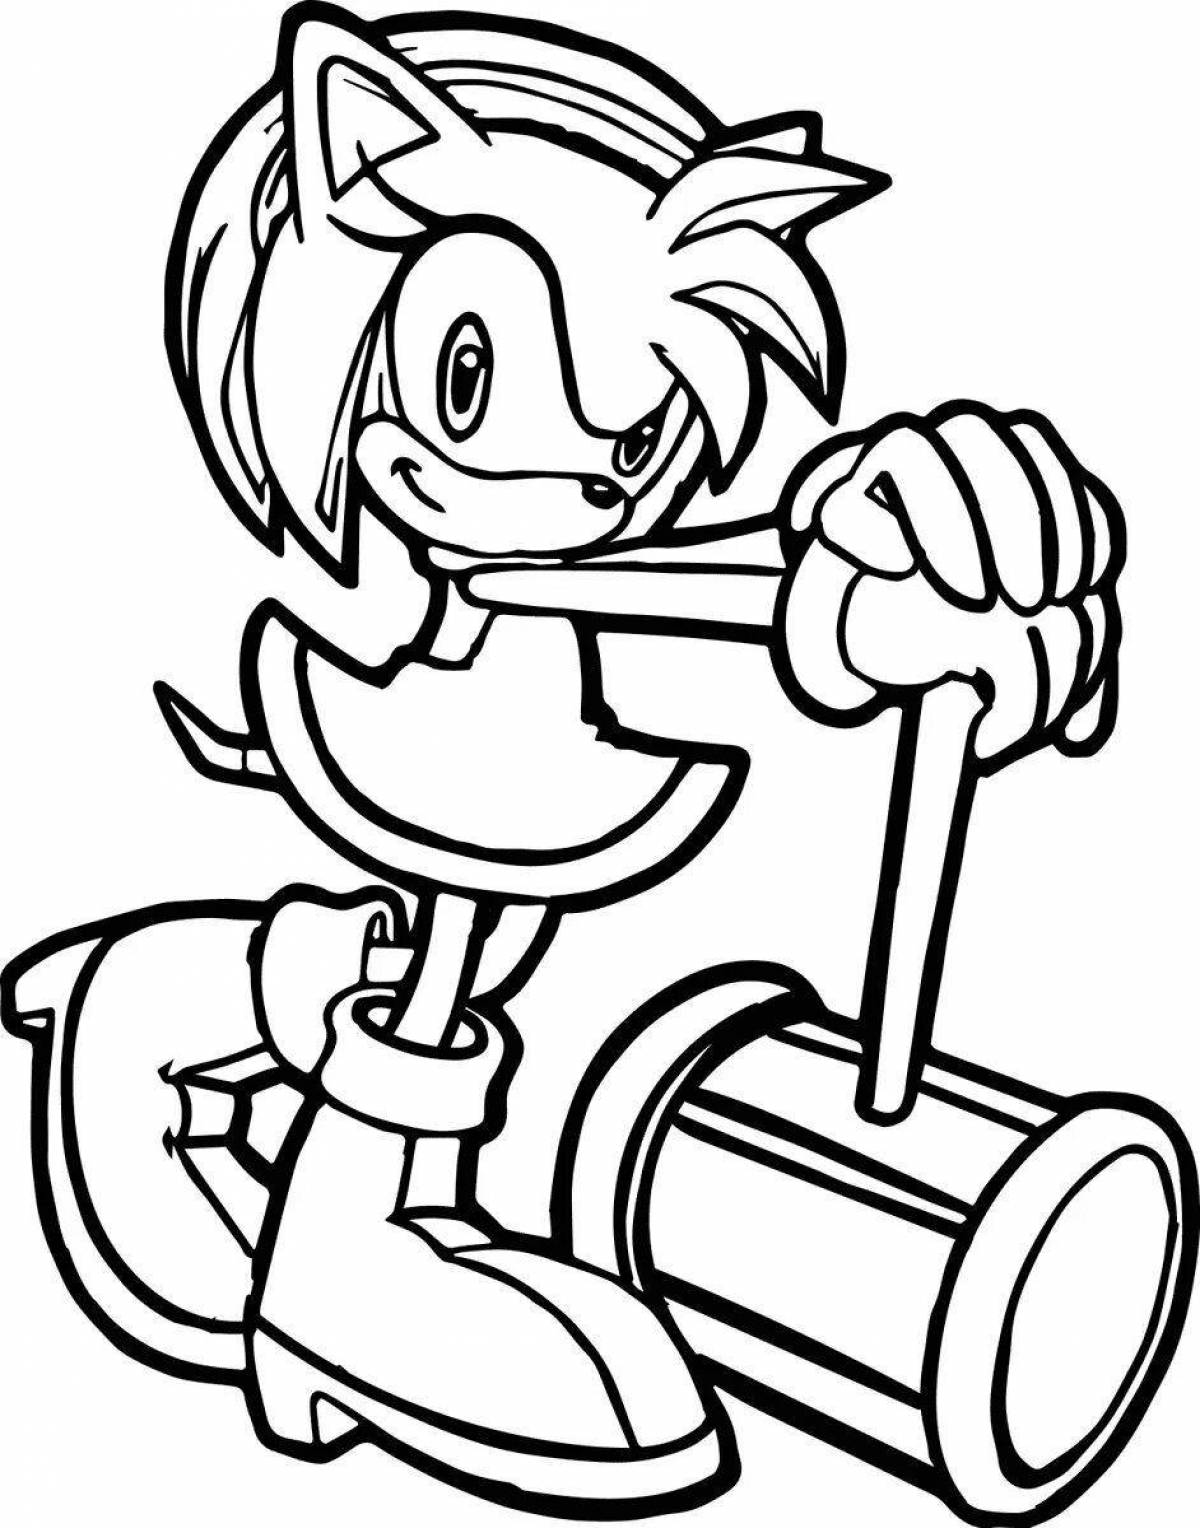 Colorful sonic girl coloring book